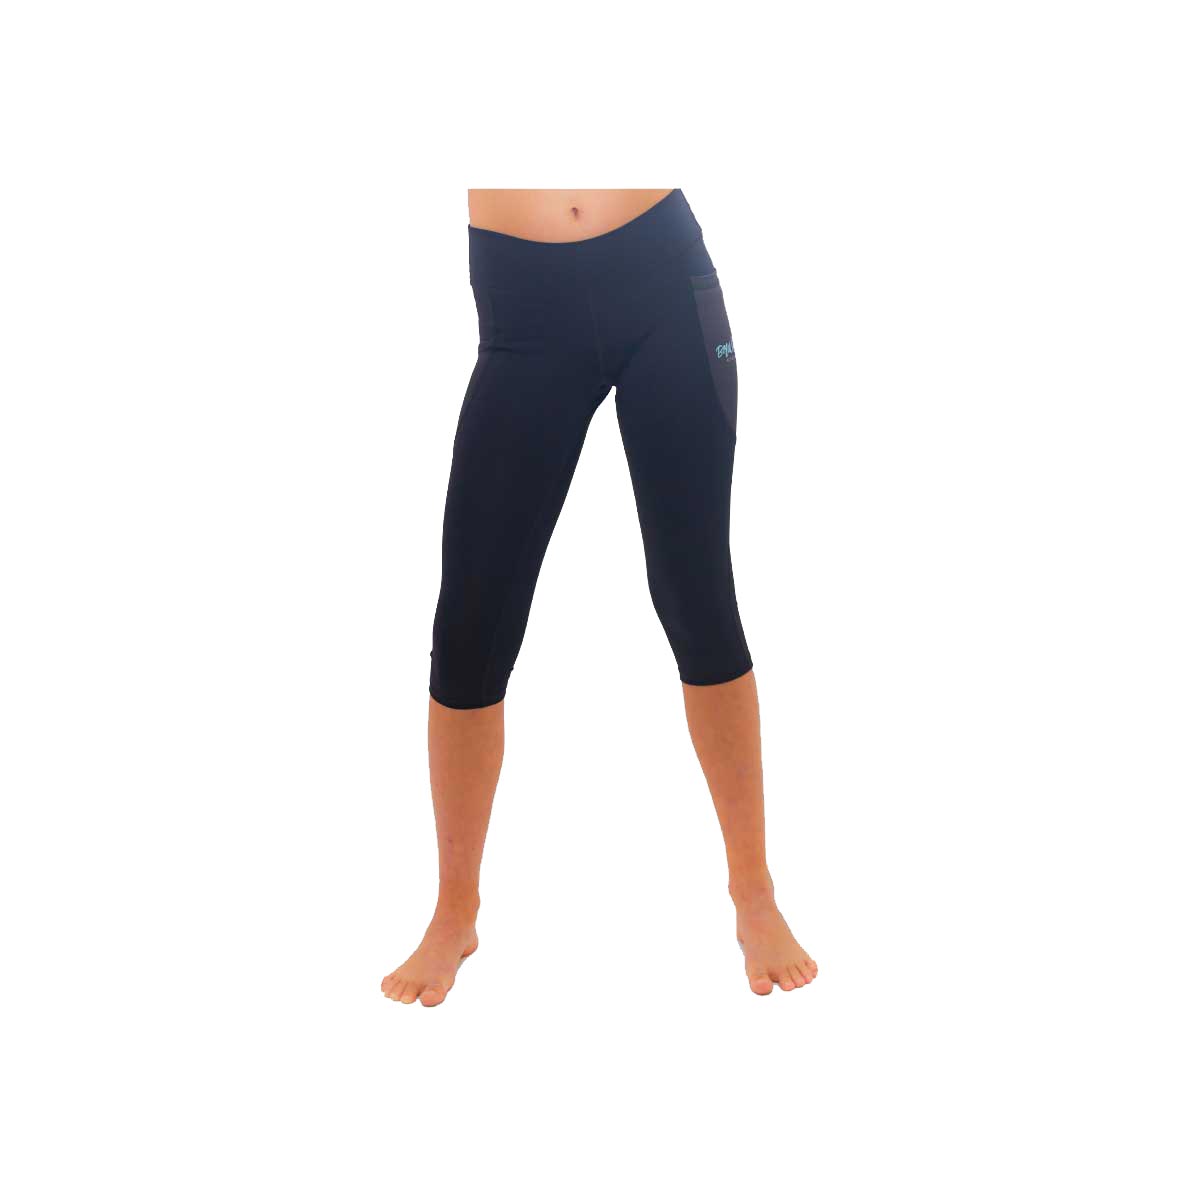 Girls' Believe Cropped Leggings, Girls' Athletic Clothes